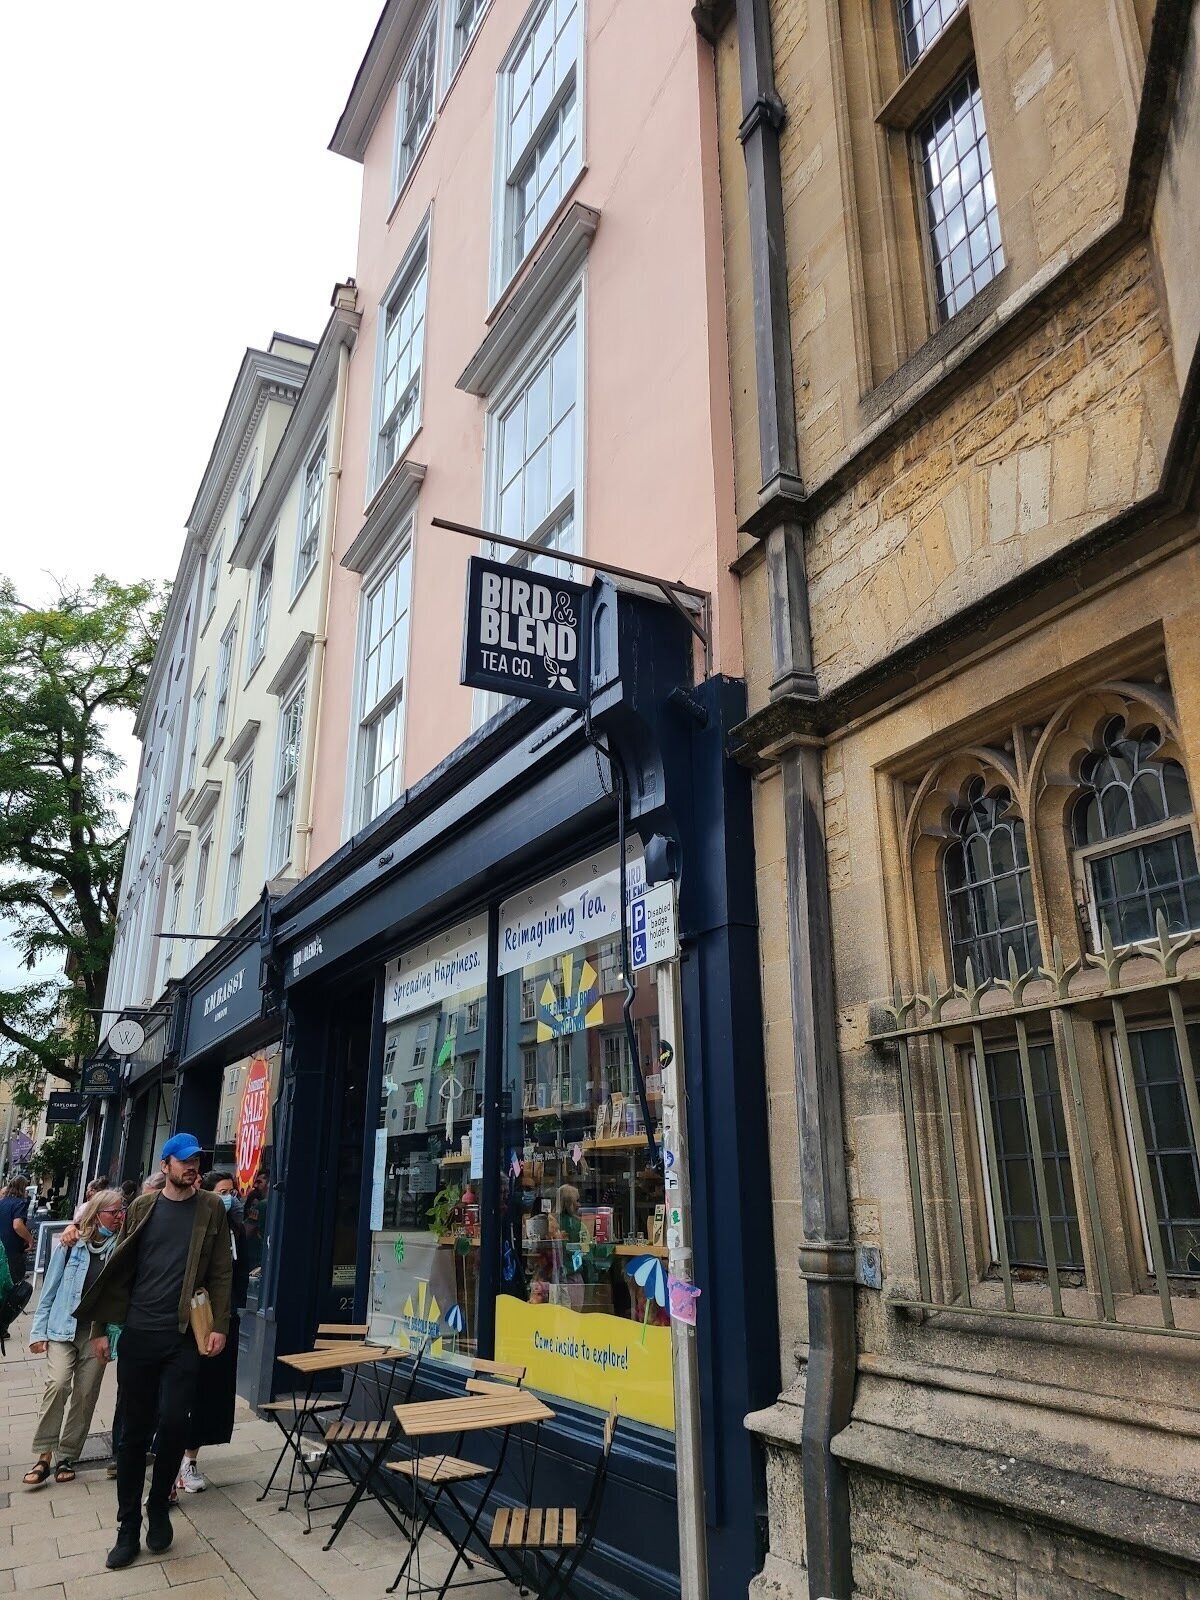 <span class="translation_missing" title="translation missing: en.meta.location_title, location_name: Bird &amp; Blend Tea Co., city: Oxford">Location Title</span>